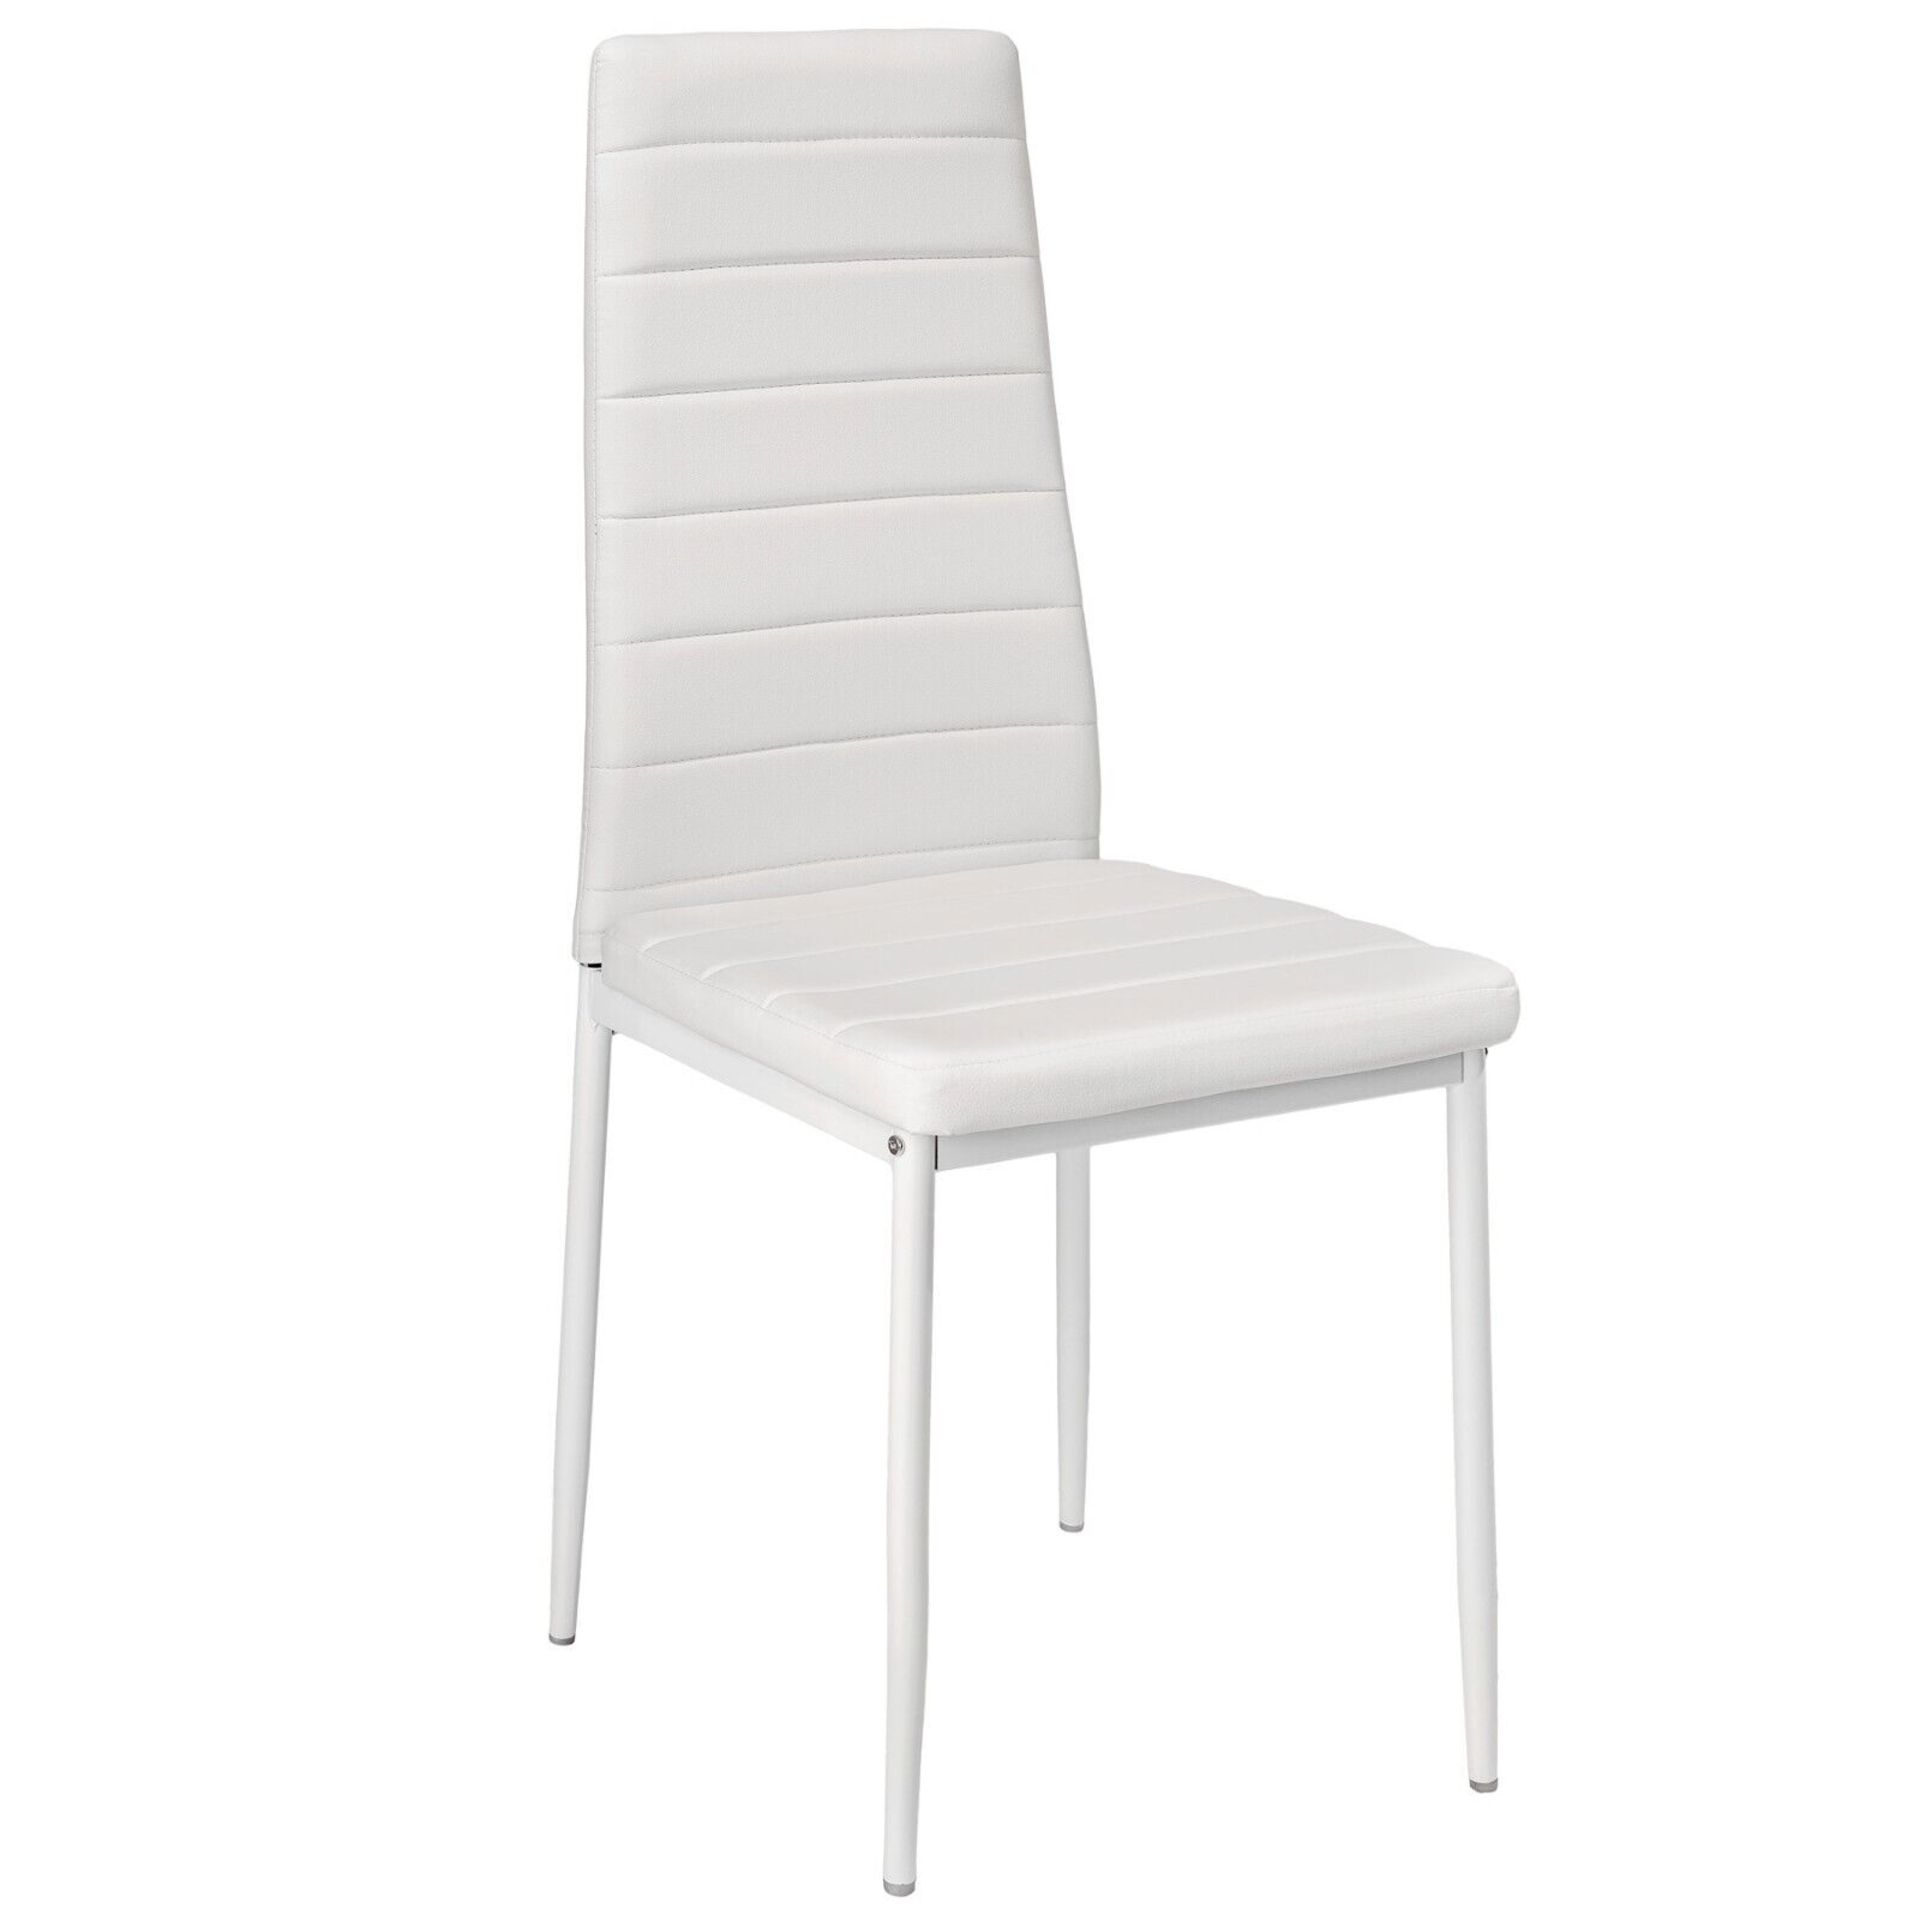 3 SETS OF 4 MODERN WHITE PU LEATHER DINING CHAIRS HIGH WHITE METAL LEGS PADDED SEAT RRP £299.97 - Image 2 of 3